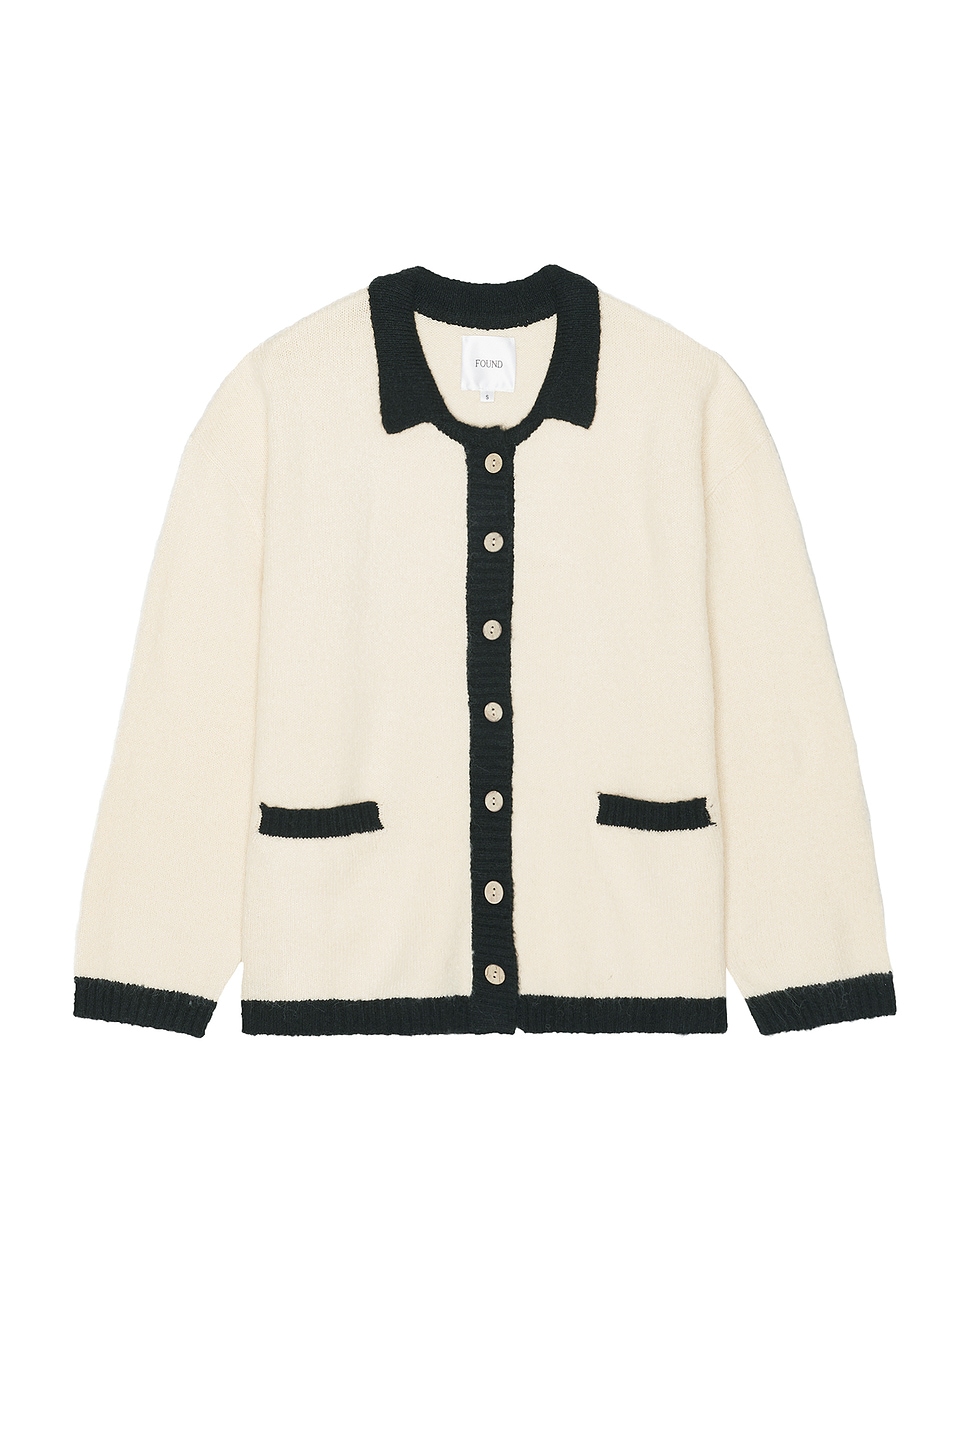 Image 1 of Found Contrast Collar Knitted Cardigan in Cream